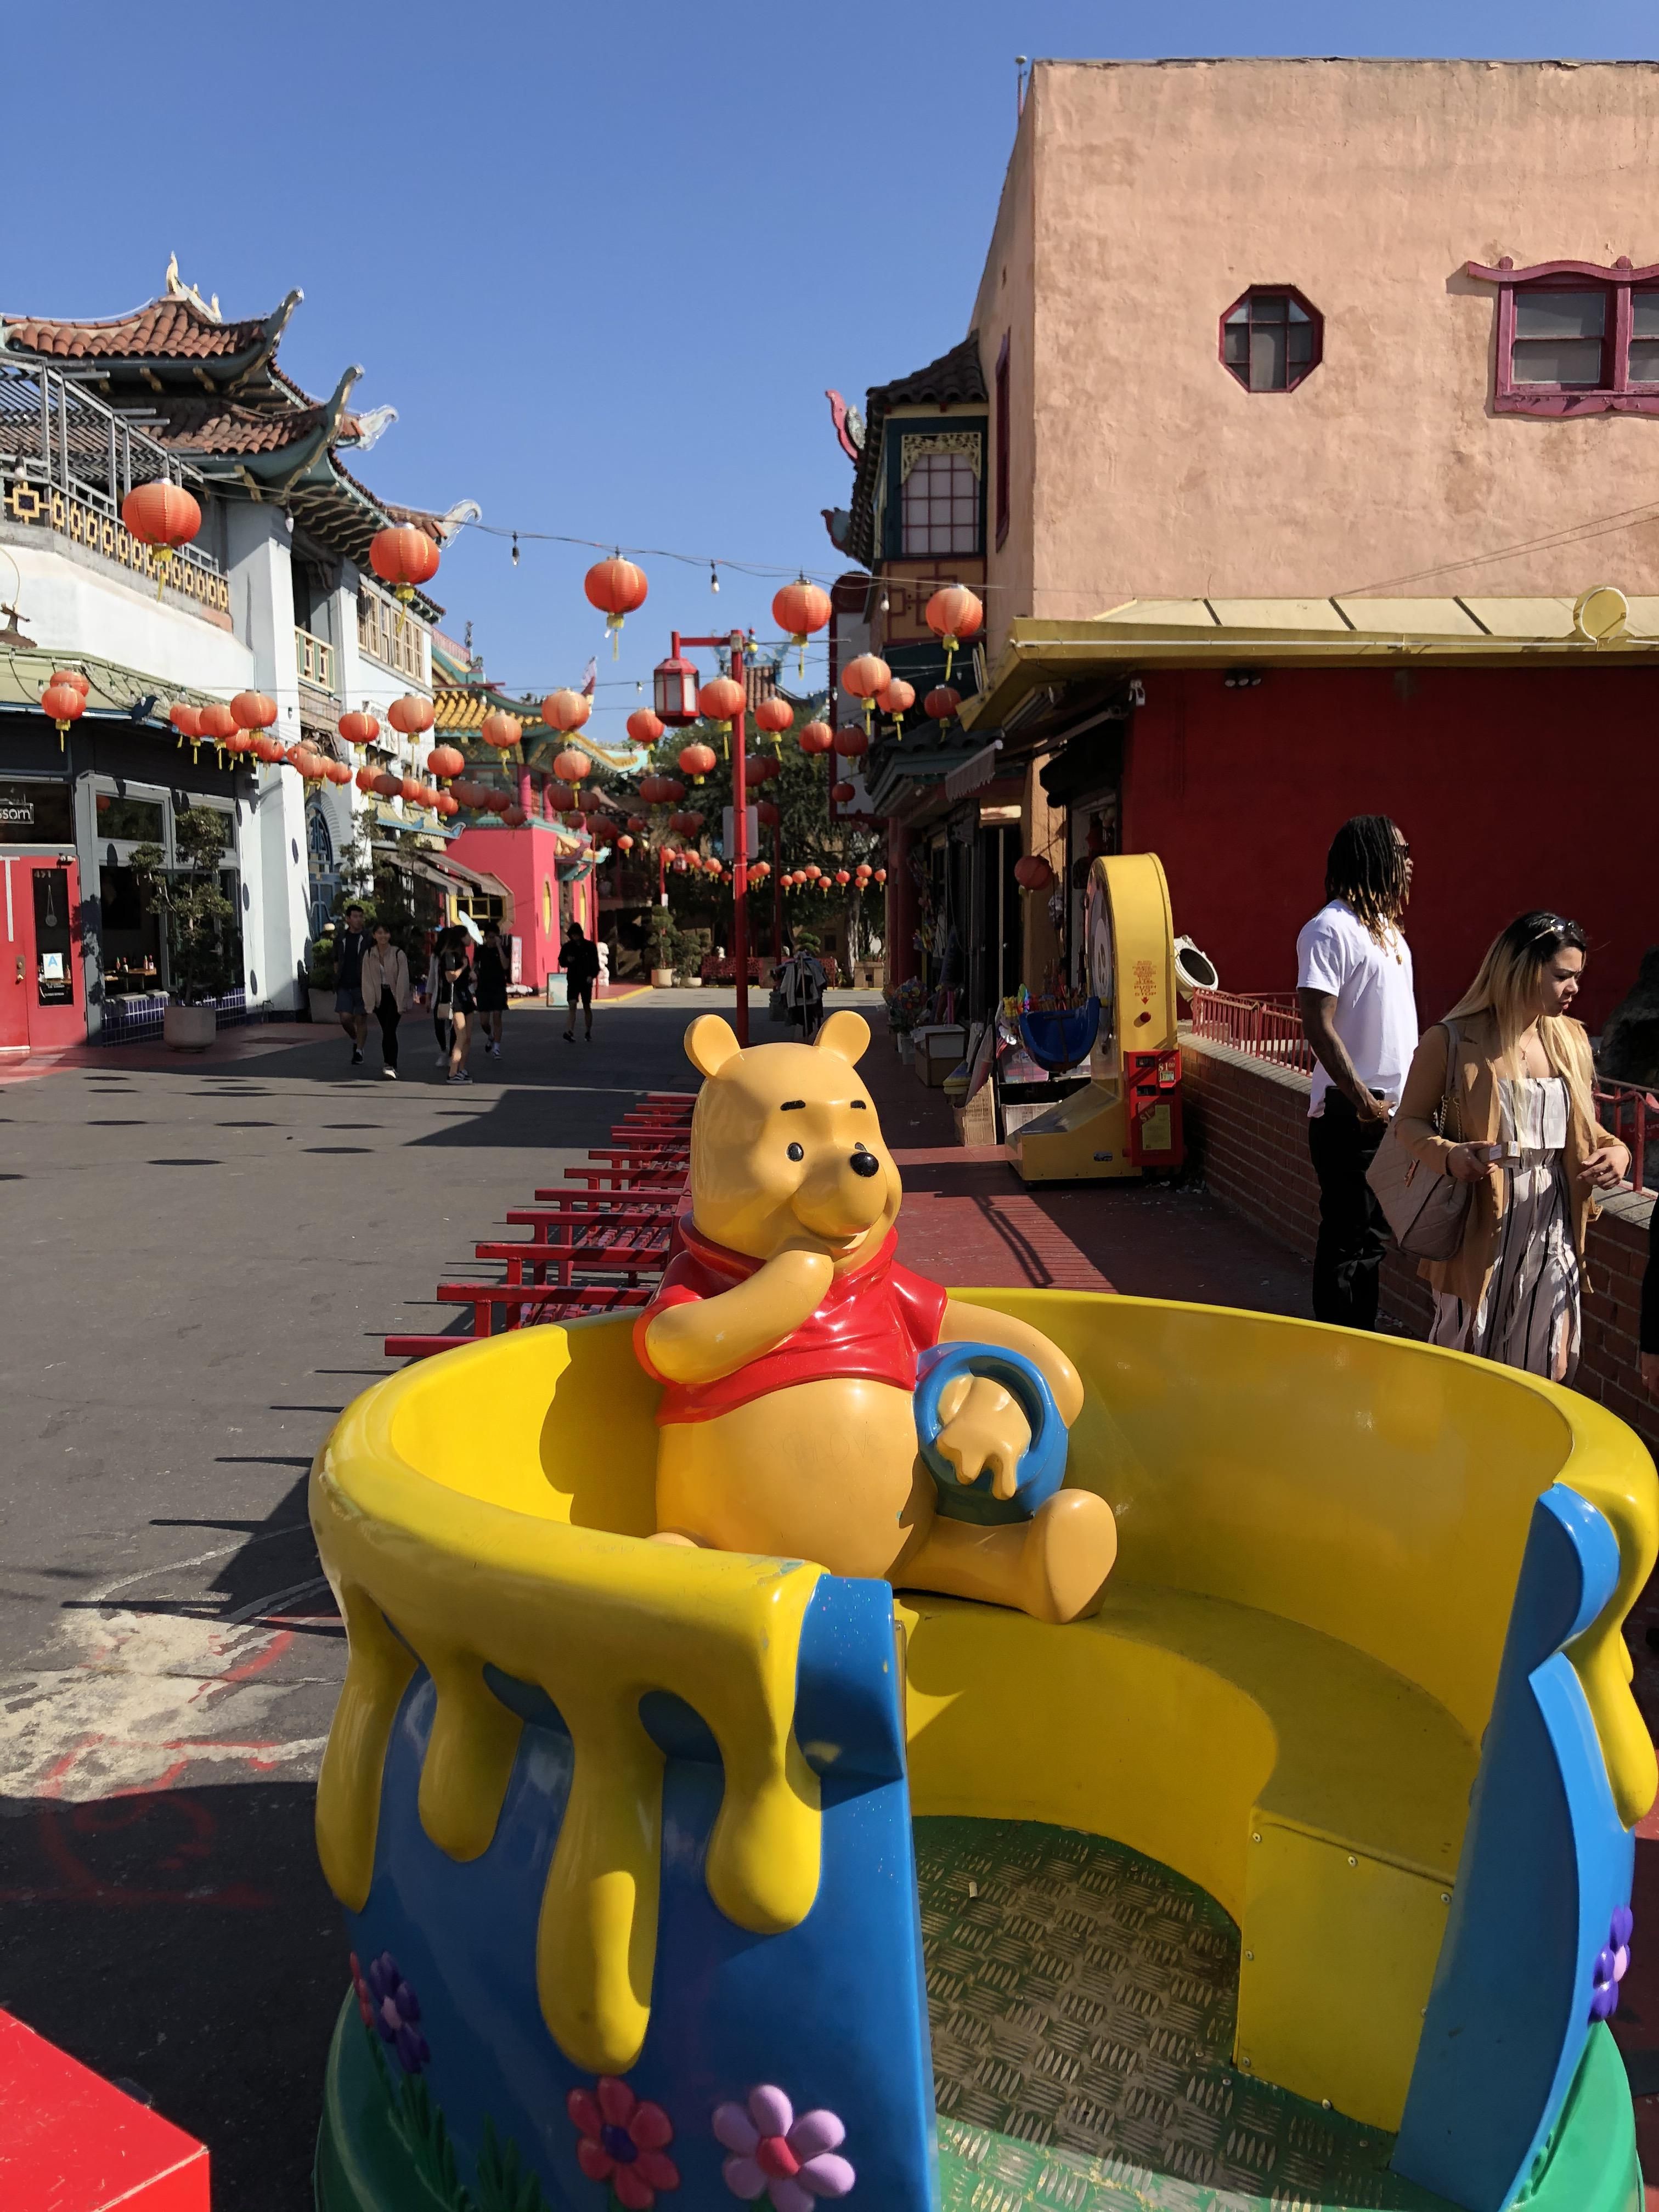 This is my new favorite ride in LA’s Chinatown.